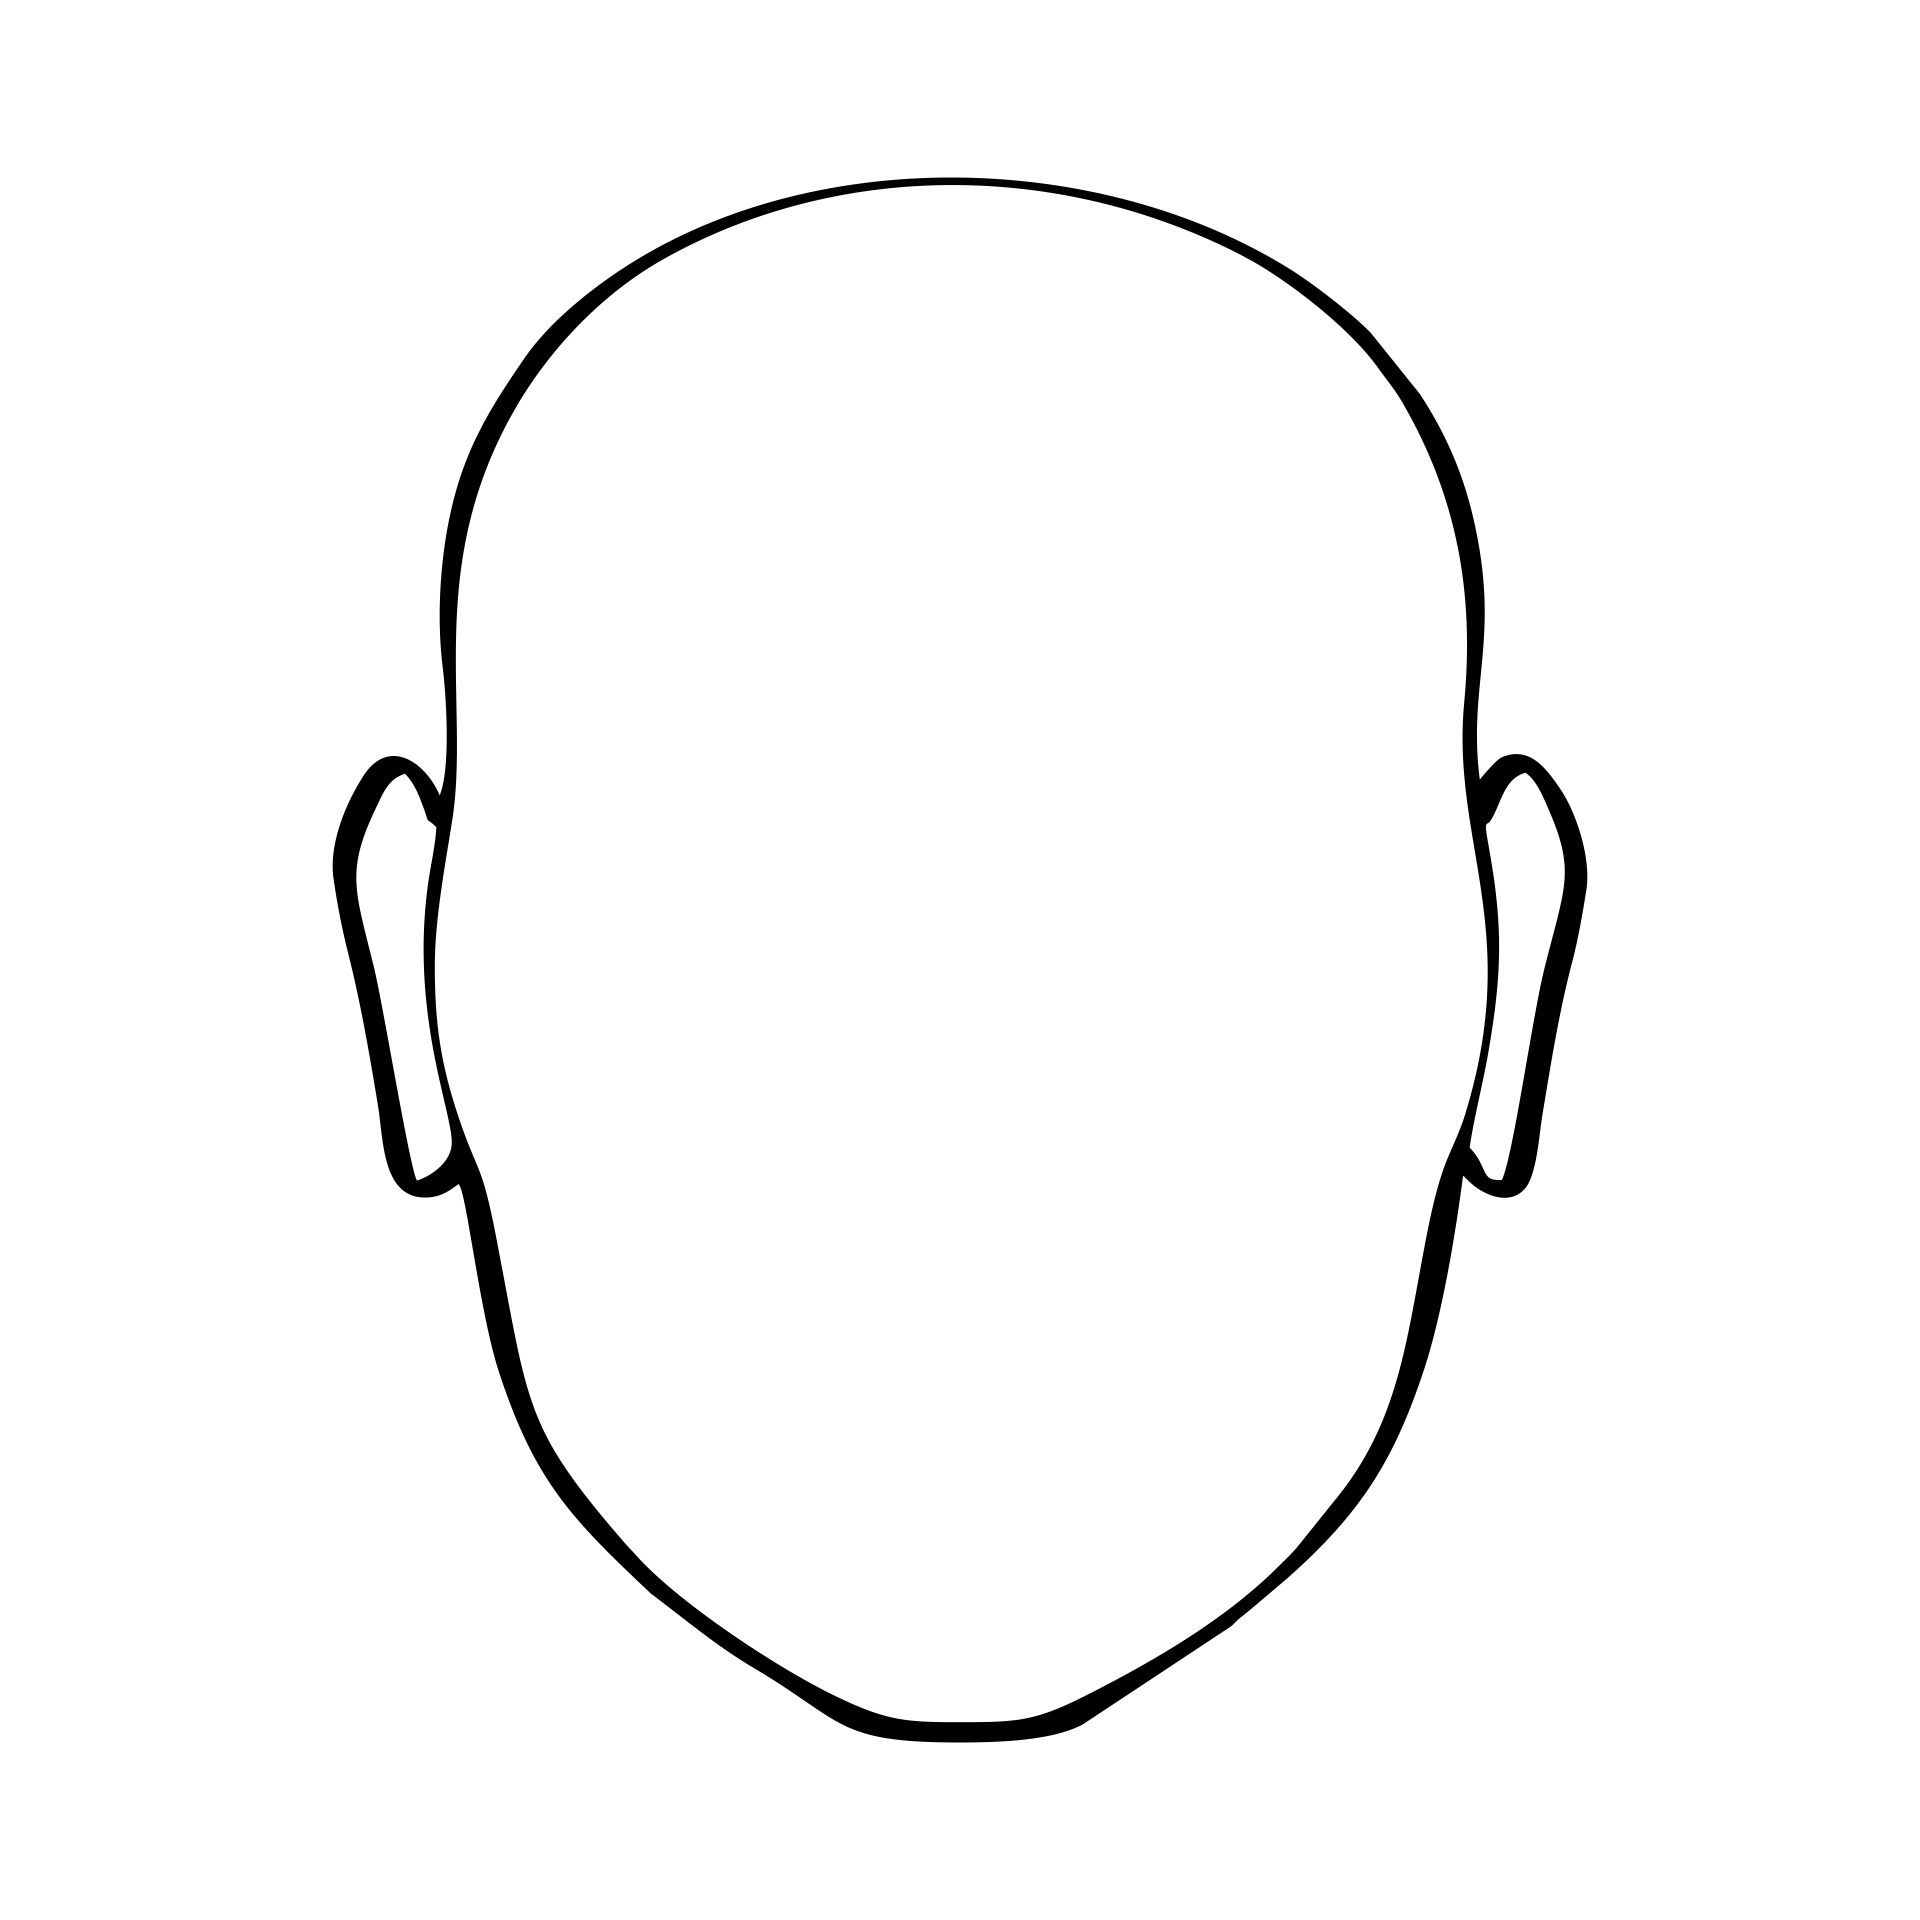 6-best-images-of-head-template-printable-human-head-outline-template